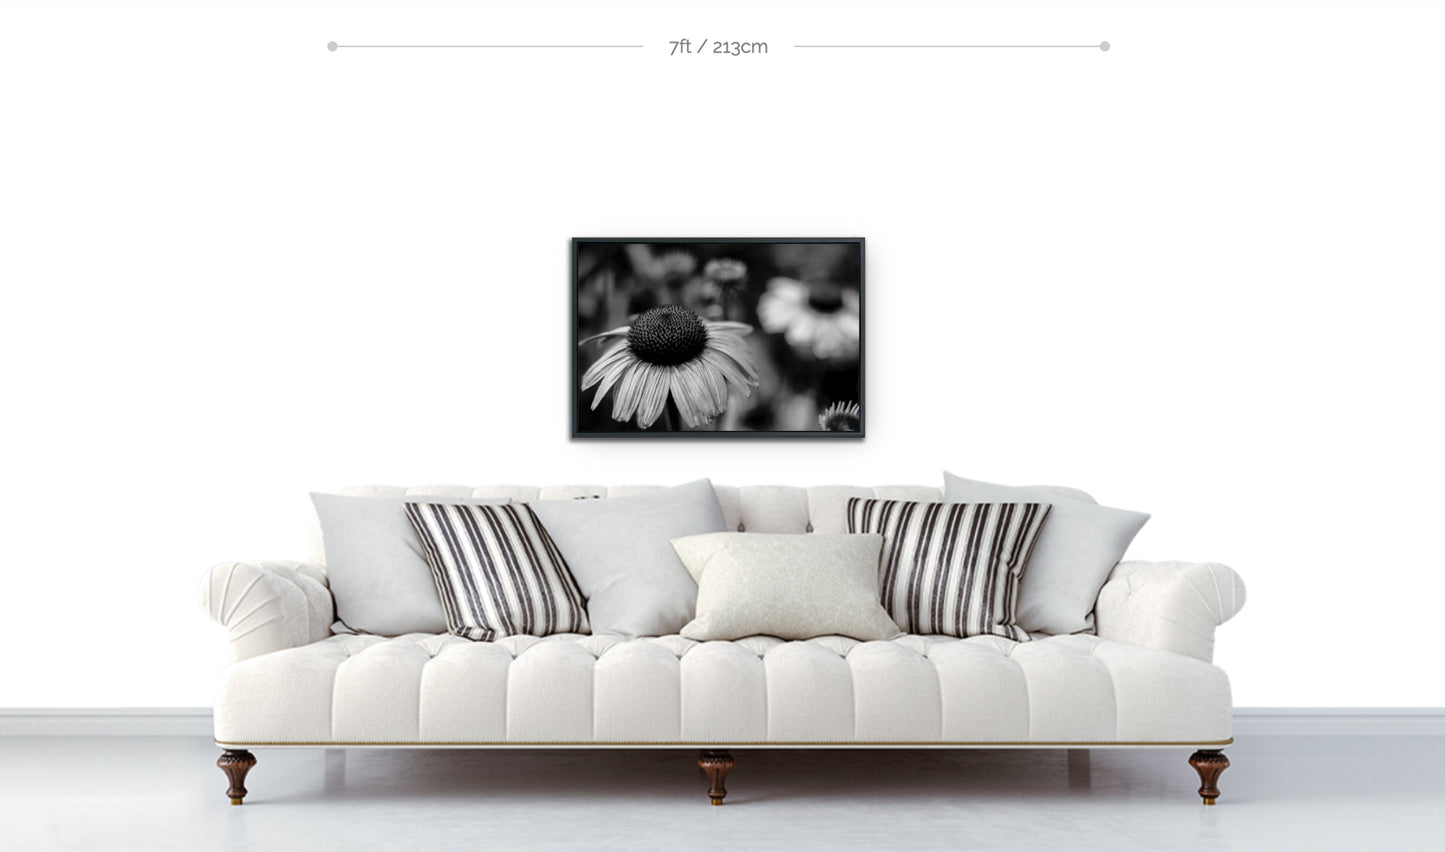 Framed flowers wall art black and white metal print echinacea cone flower in focus in foreground displayed above sofa